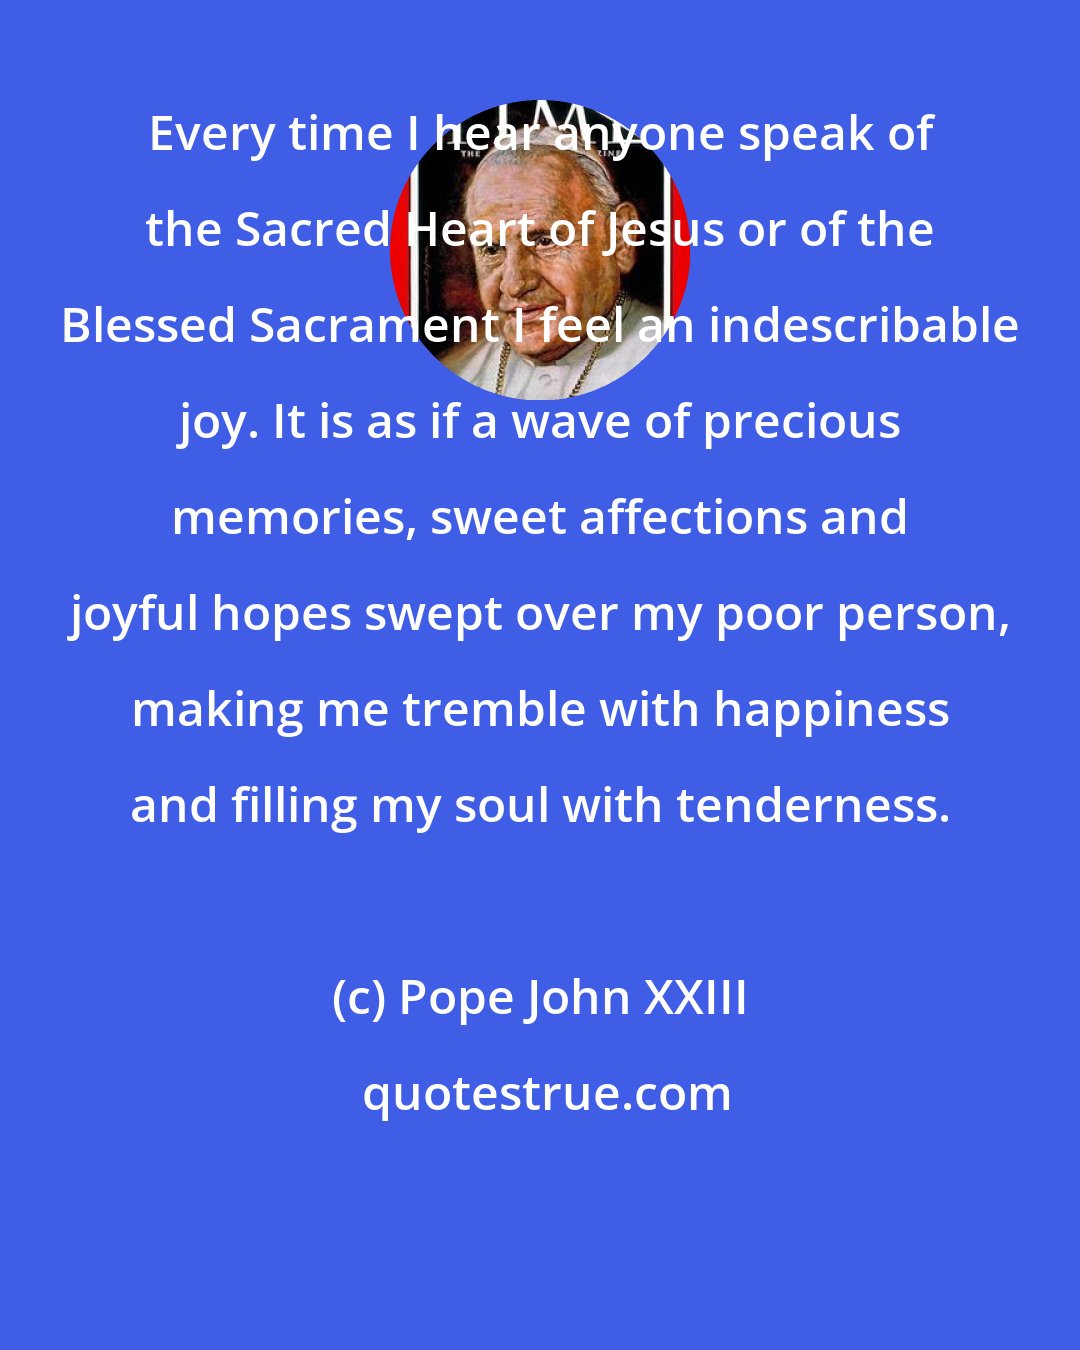 Pope John XXIII: Every time I hear anyone speak of the Sacred Heart of Jesus or of the Blessed Sacrament I feel an indescribable joy. It is as if a wave of precious memories, sweet affections and joyful hopes swept over my poor person, making me tremble with happiness and filling my soul with tenderness.